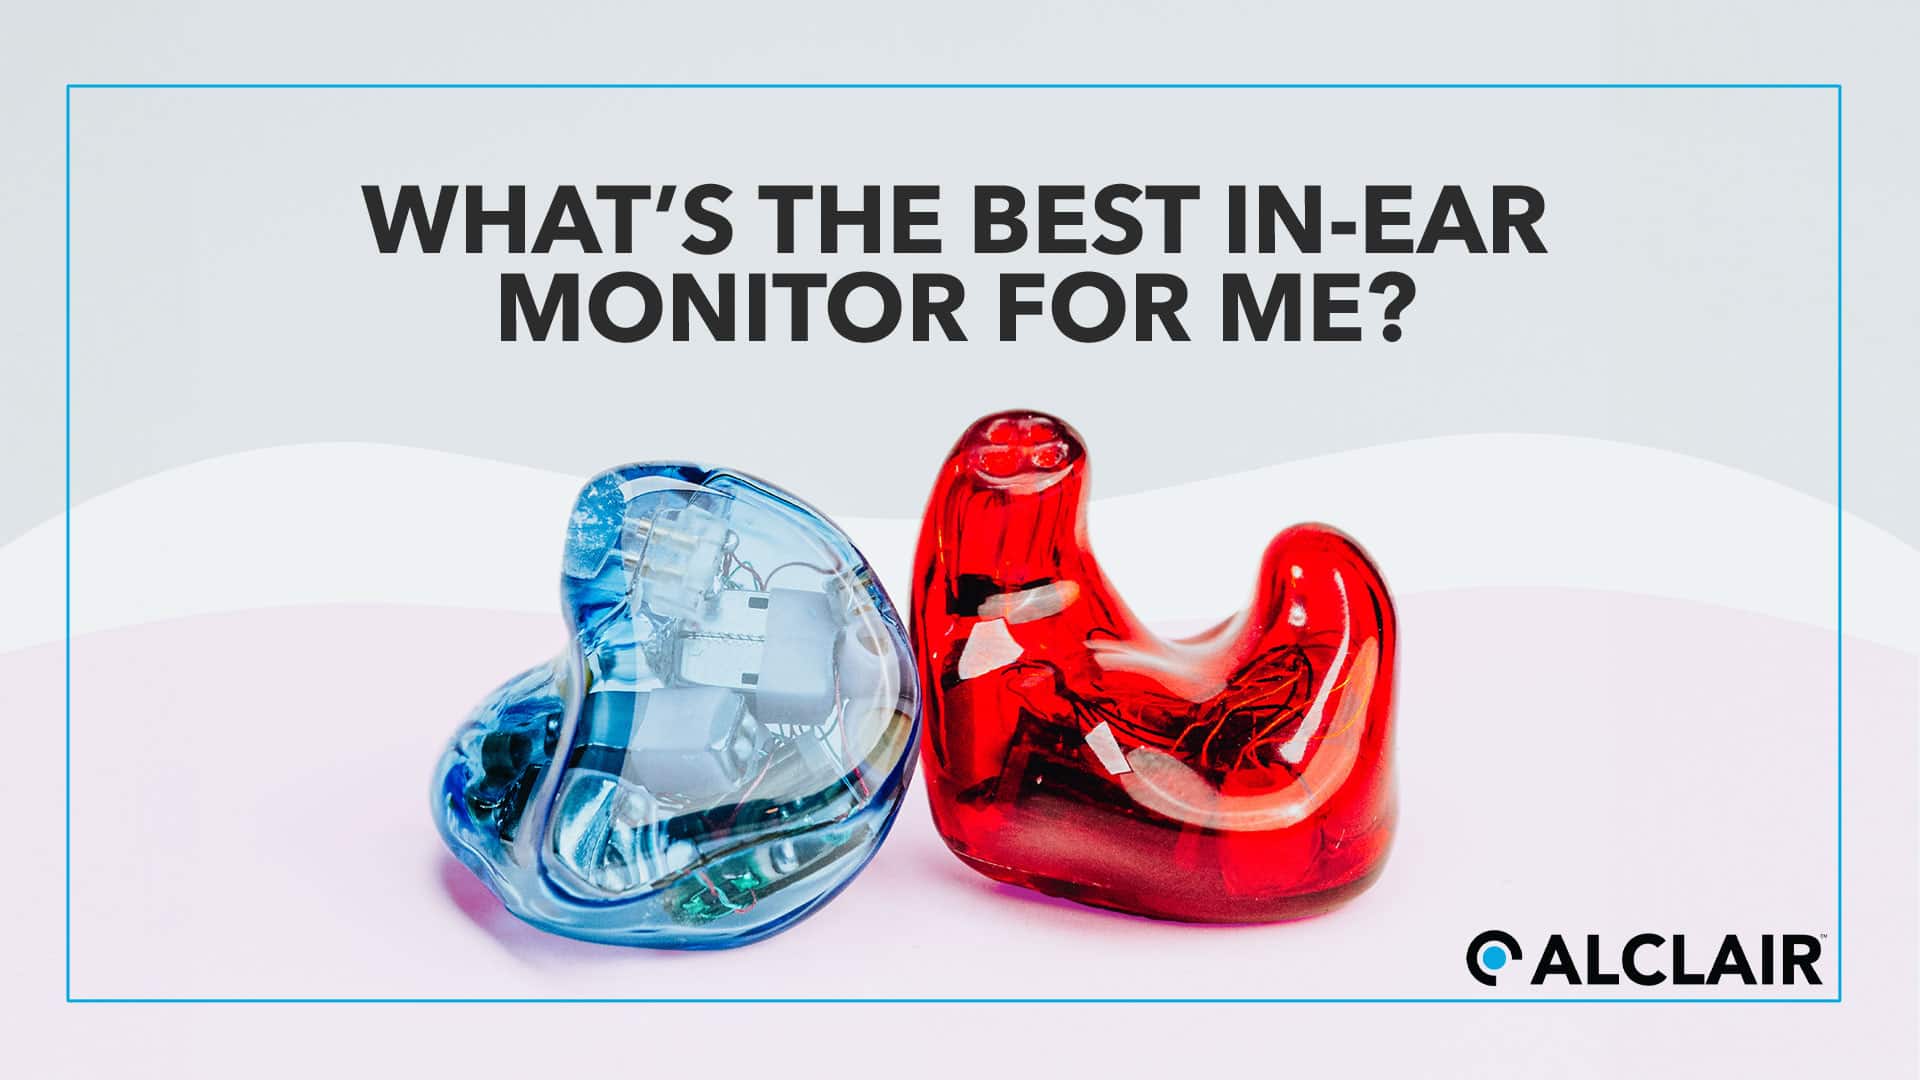 What is the best in-ear monitor for me?